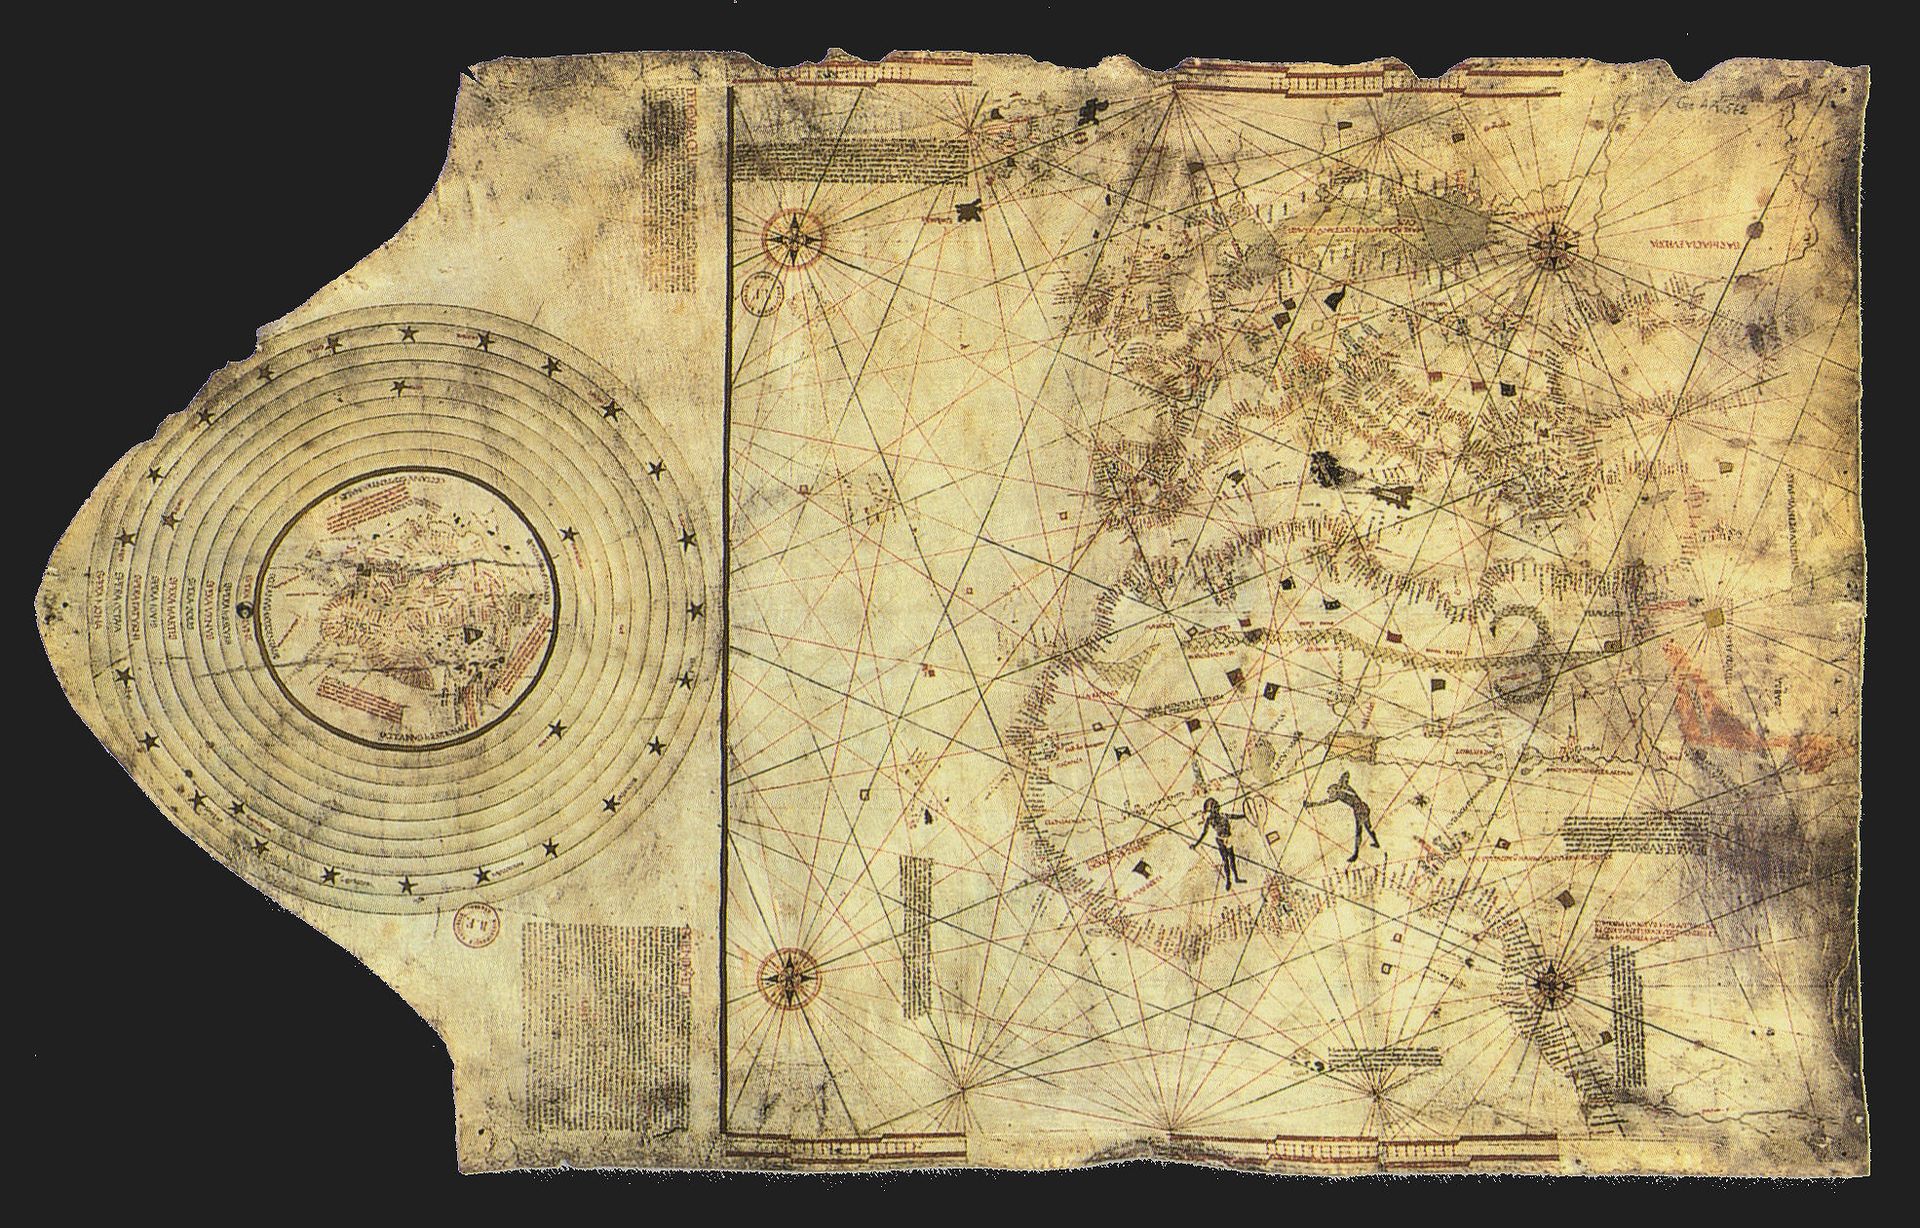 Columbus map, drawn c. 1490 in the Lisbon workshop of Bartolomeo and Christopher Columbus